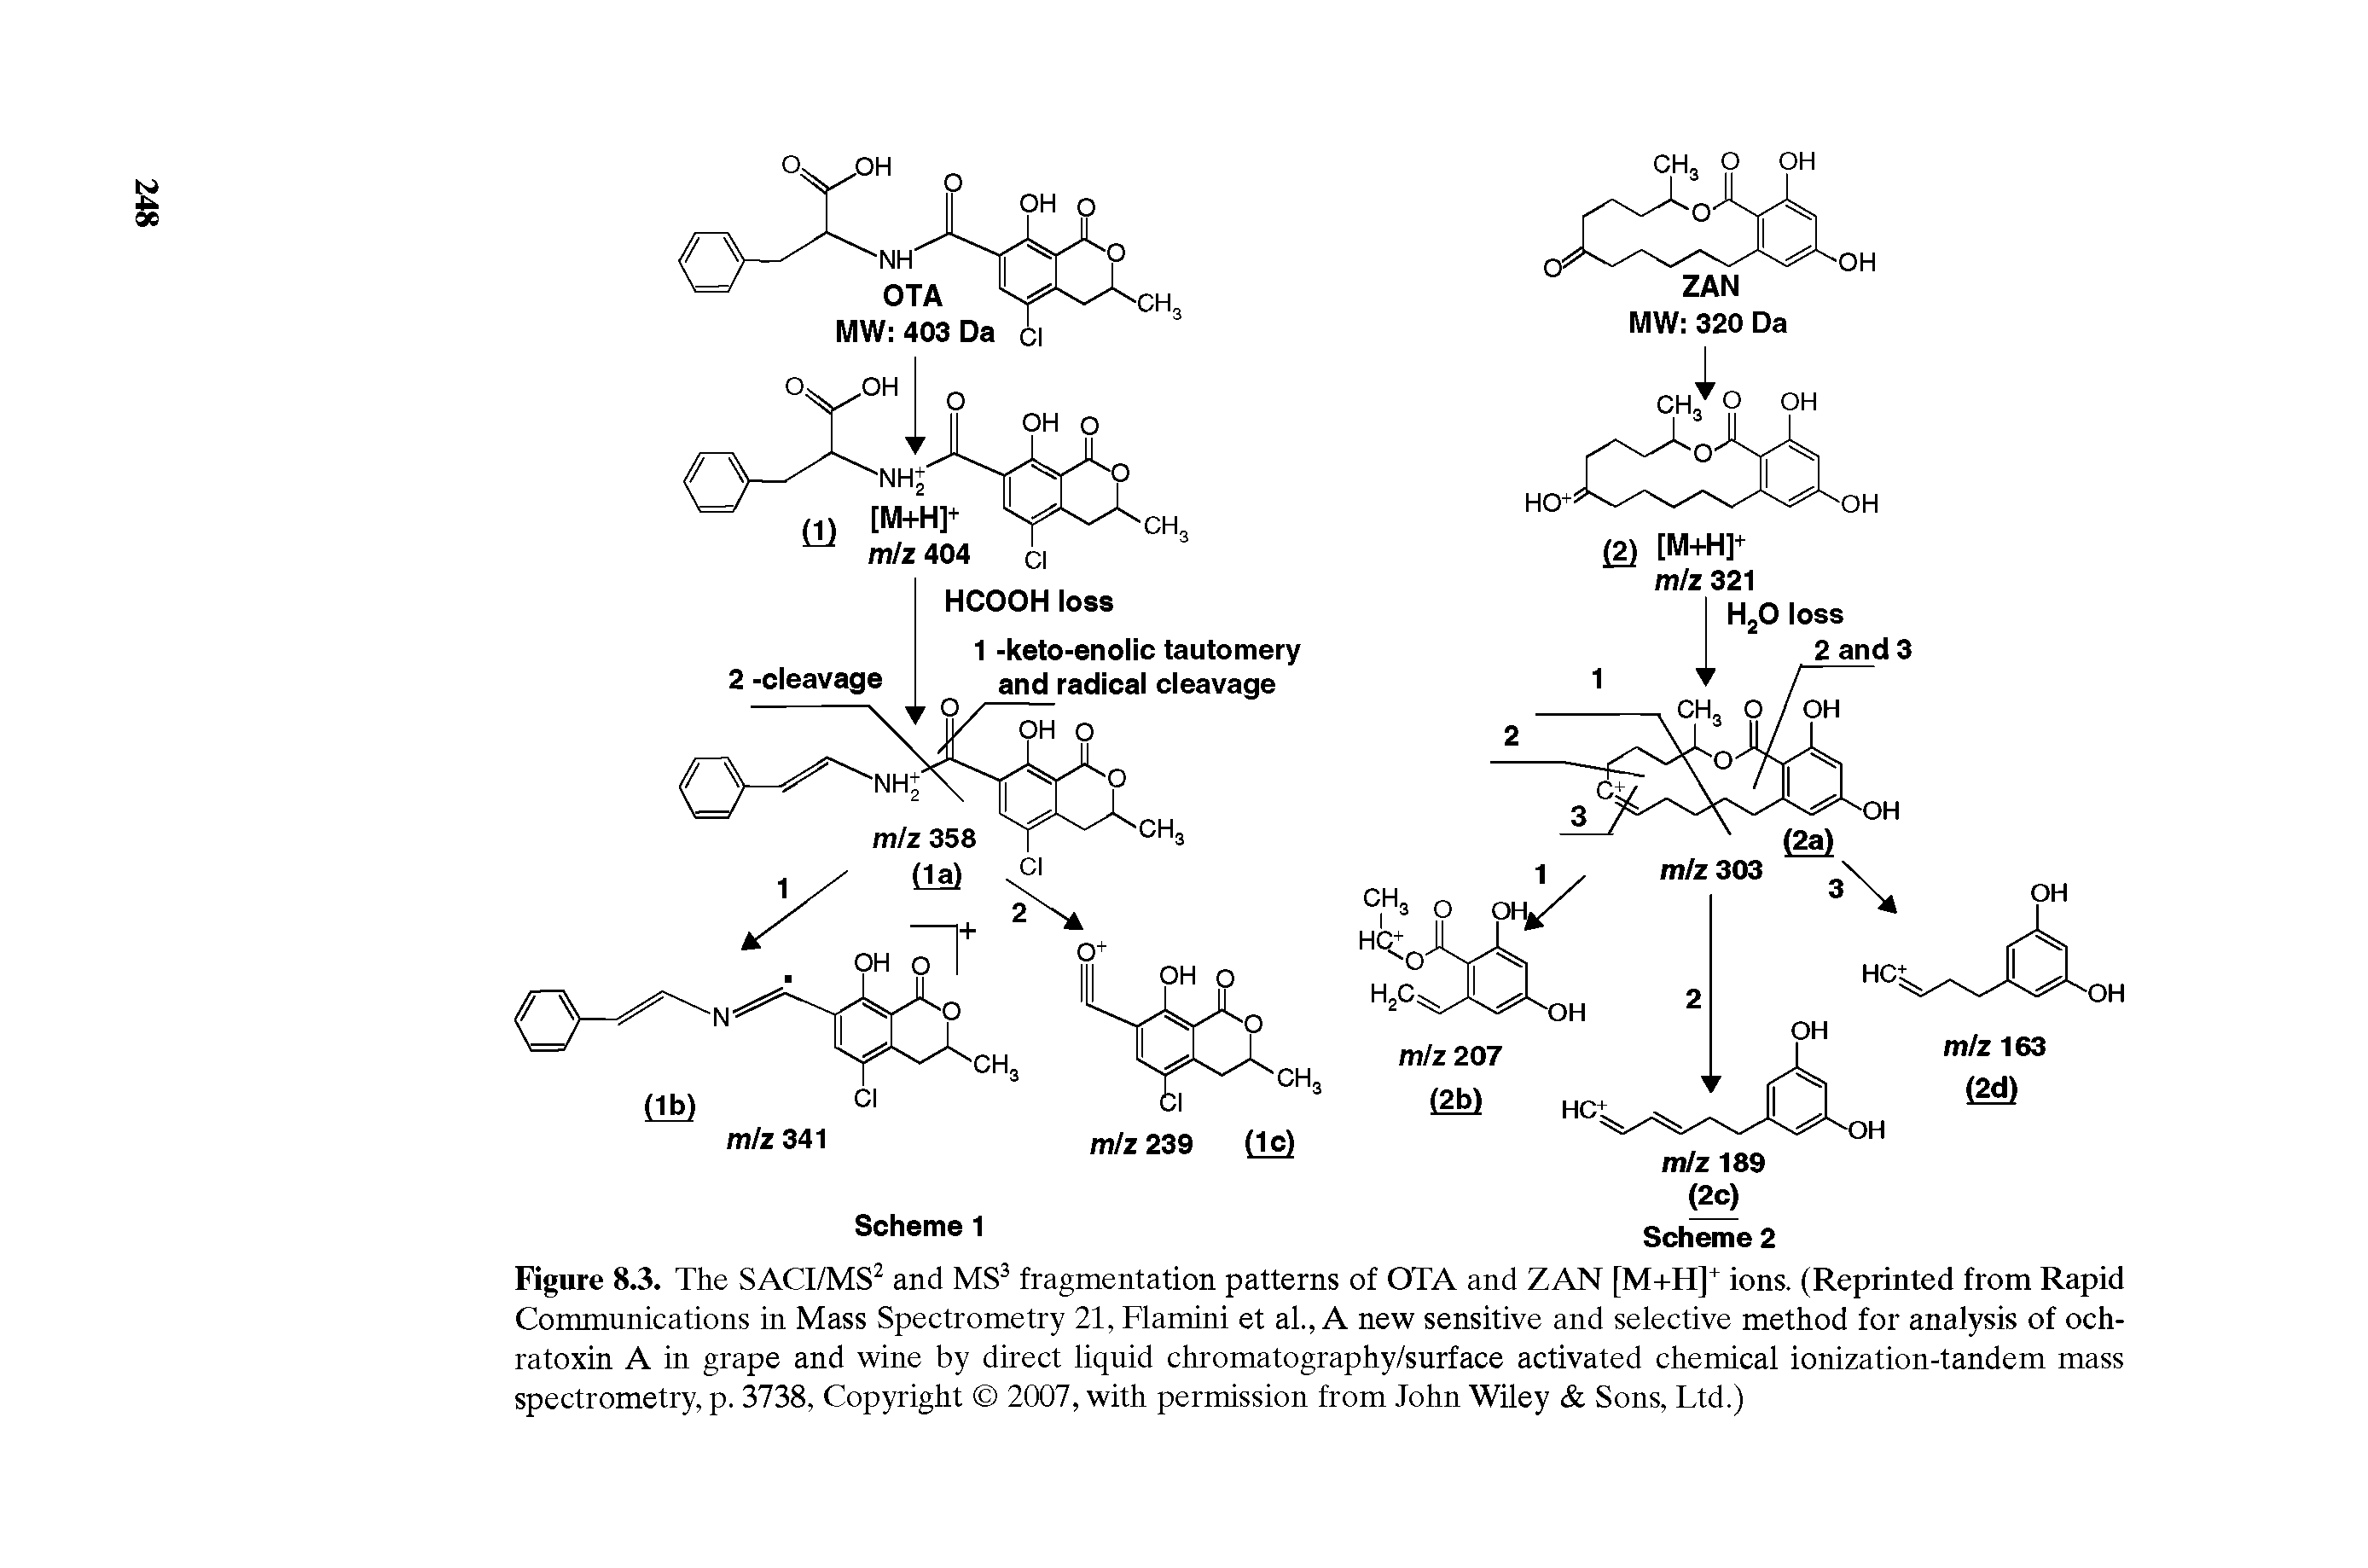 Figure 8.3. The SACI/MS2 and MS3 fragmentation patterns of OTA and ZAN [M+H]+ ions. (Reprinted from Rapid Communications in Mass Spectrometry 21, Flamini et al., A new sensitive and selective method for analysis of och-ratoxin A in grape and wine by direct liquid chromatography/surface activated chemical ionization-tandem mass spectrometry, p. 3738, Copyright 2007, with permission from John Wiley Sons, Ltd.)...